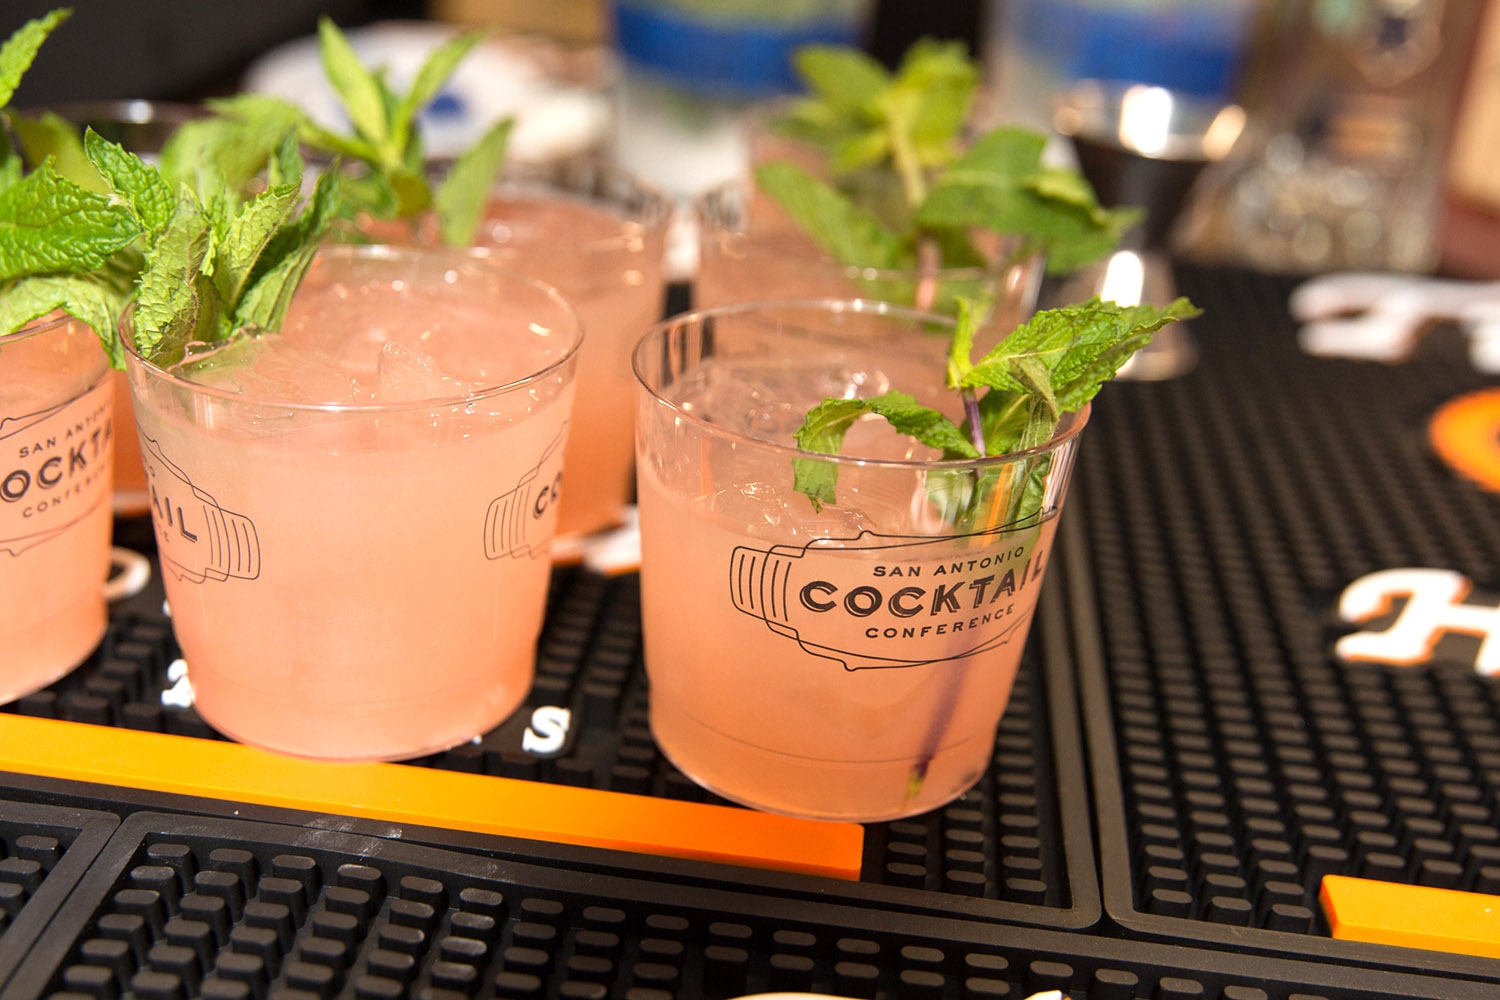 Come & Taste It! event kicks off the 2019 San Antonio Cocktail Festival Thursday night at Battle for Texas: The Experience at Rivercenter Mall.